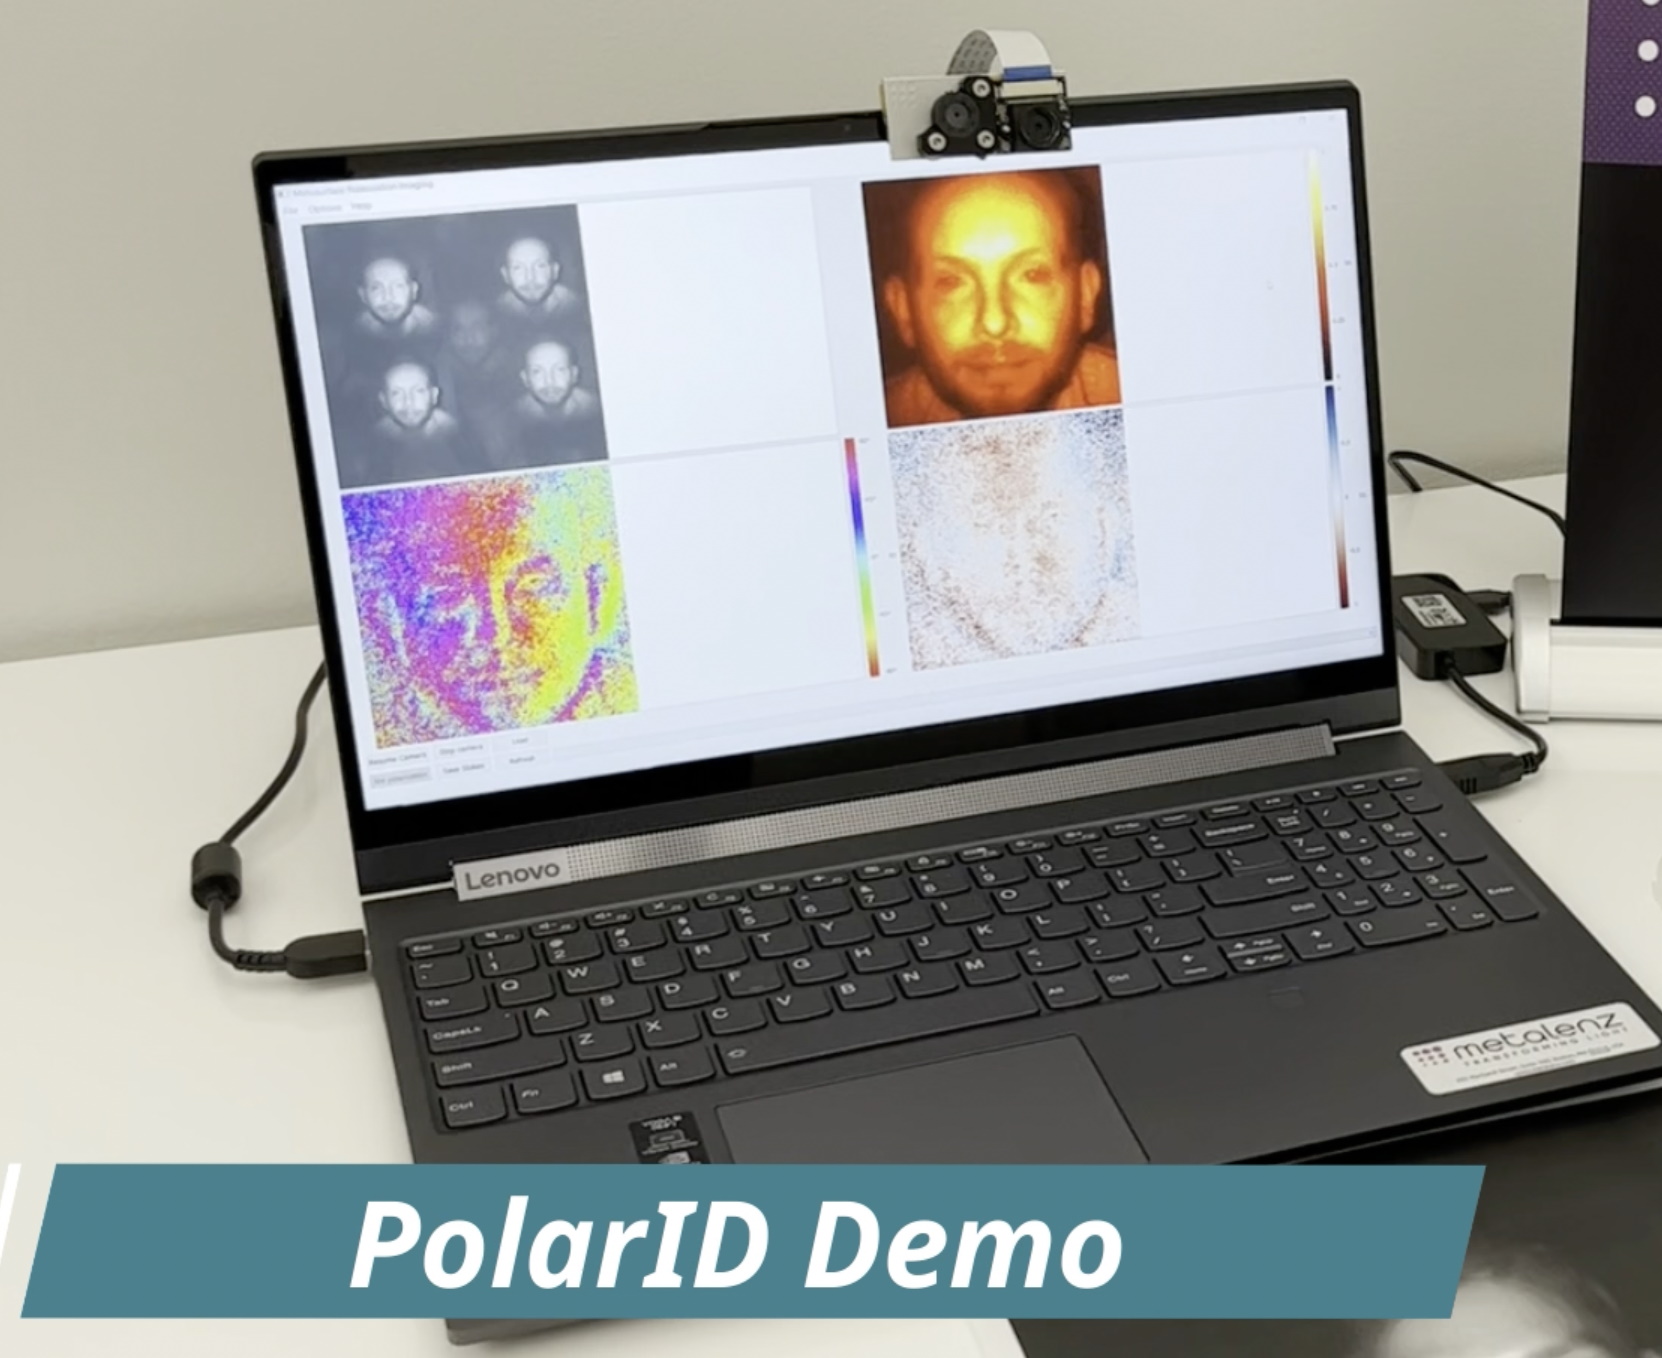 Demo of PolarID, a facial recognition system using polarized light instead of 3D sensing.